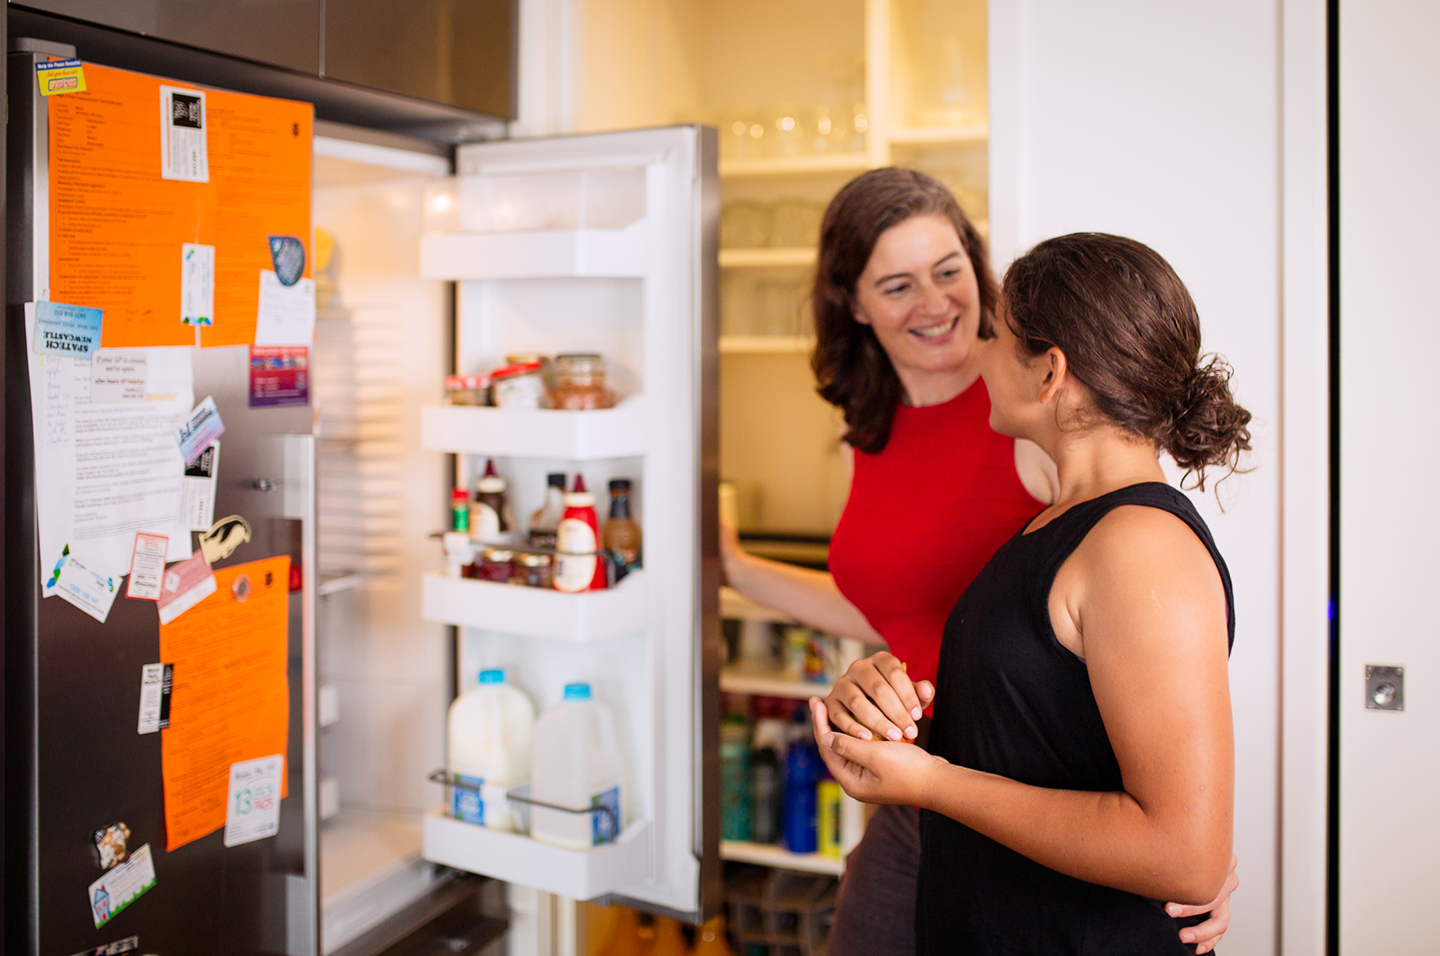 Parent and child in kitchen with open fridge